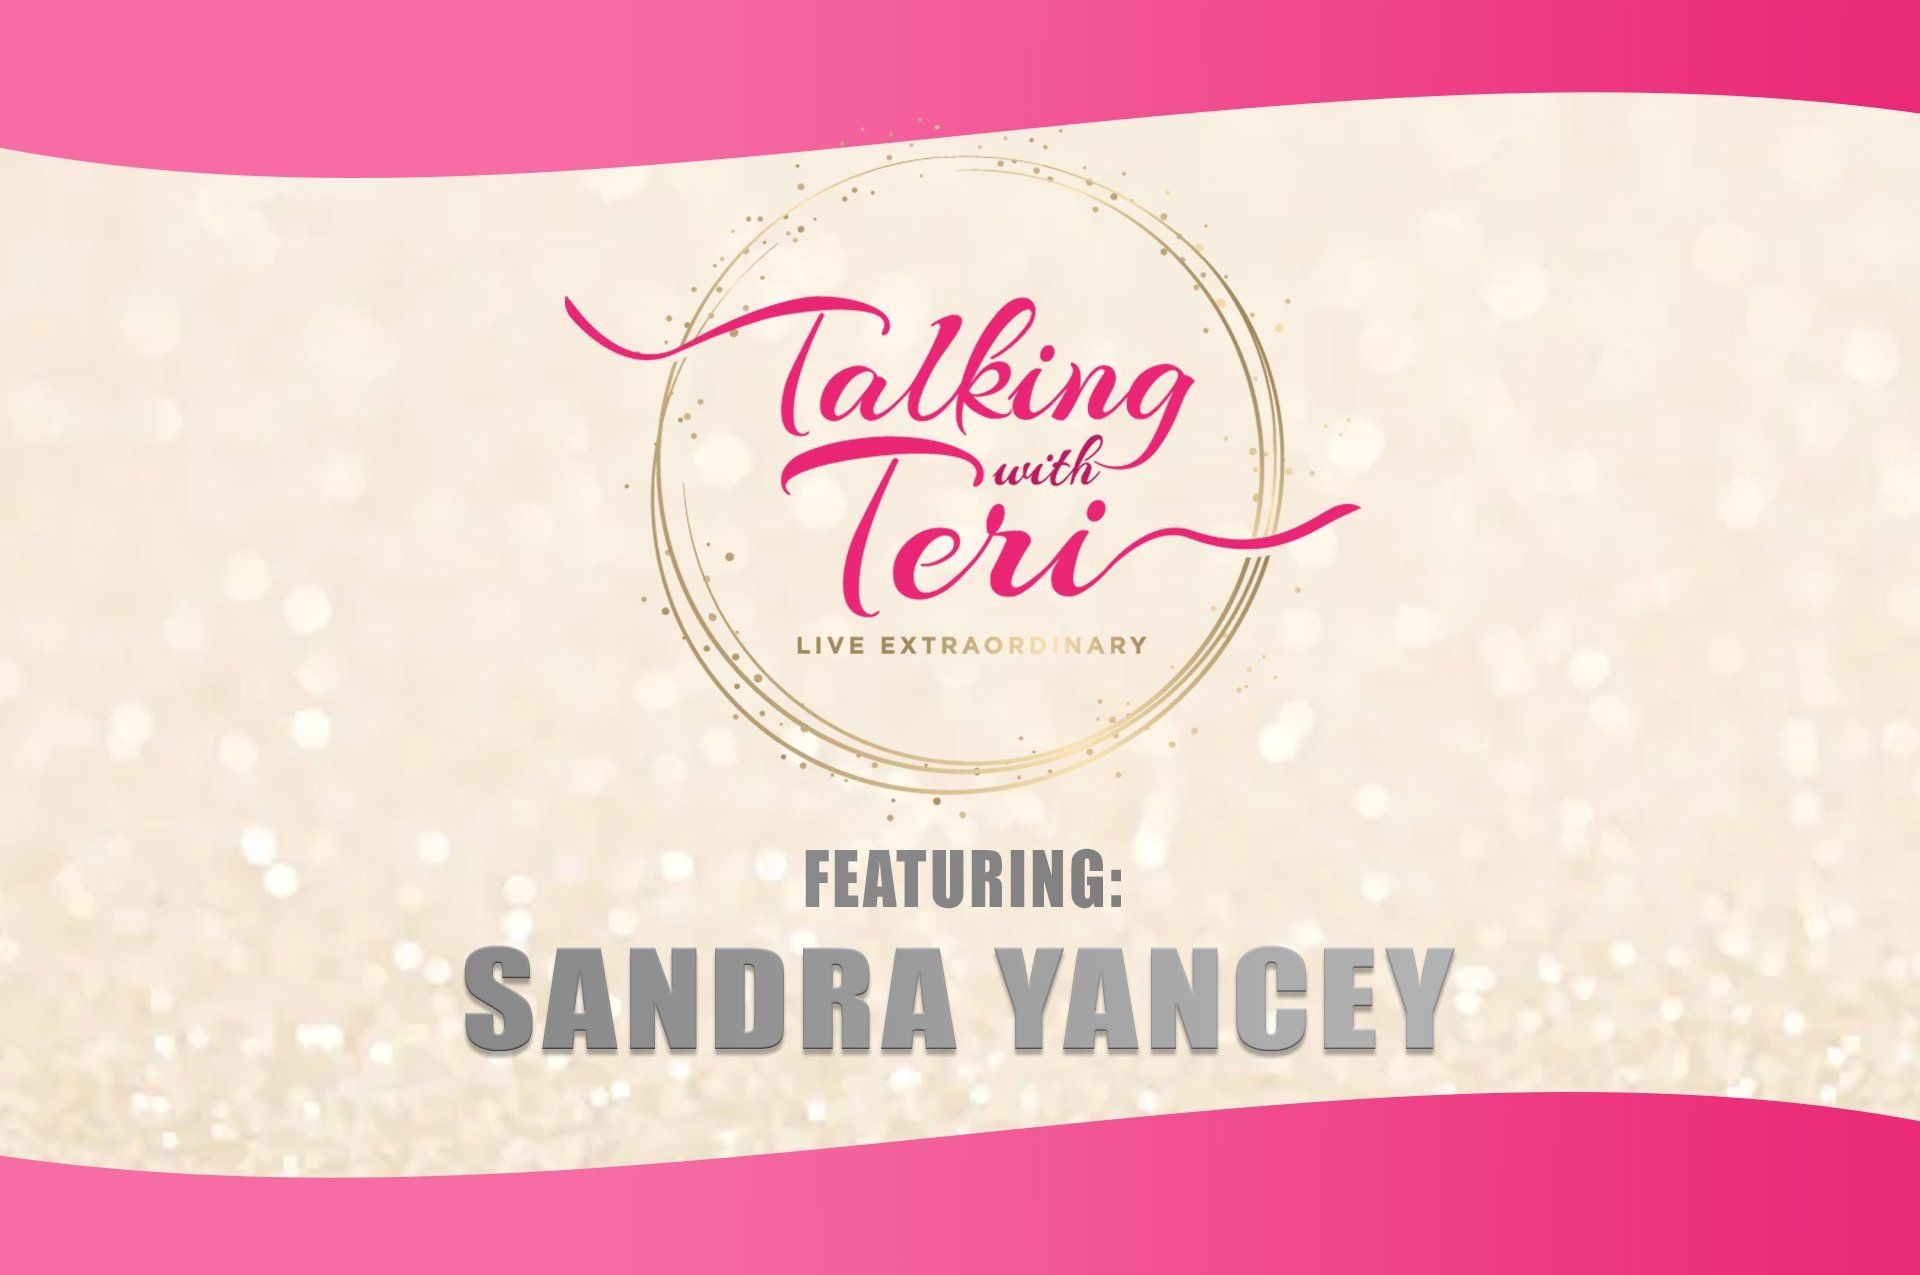 Talking With Teri and Sandra Yancey